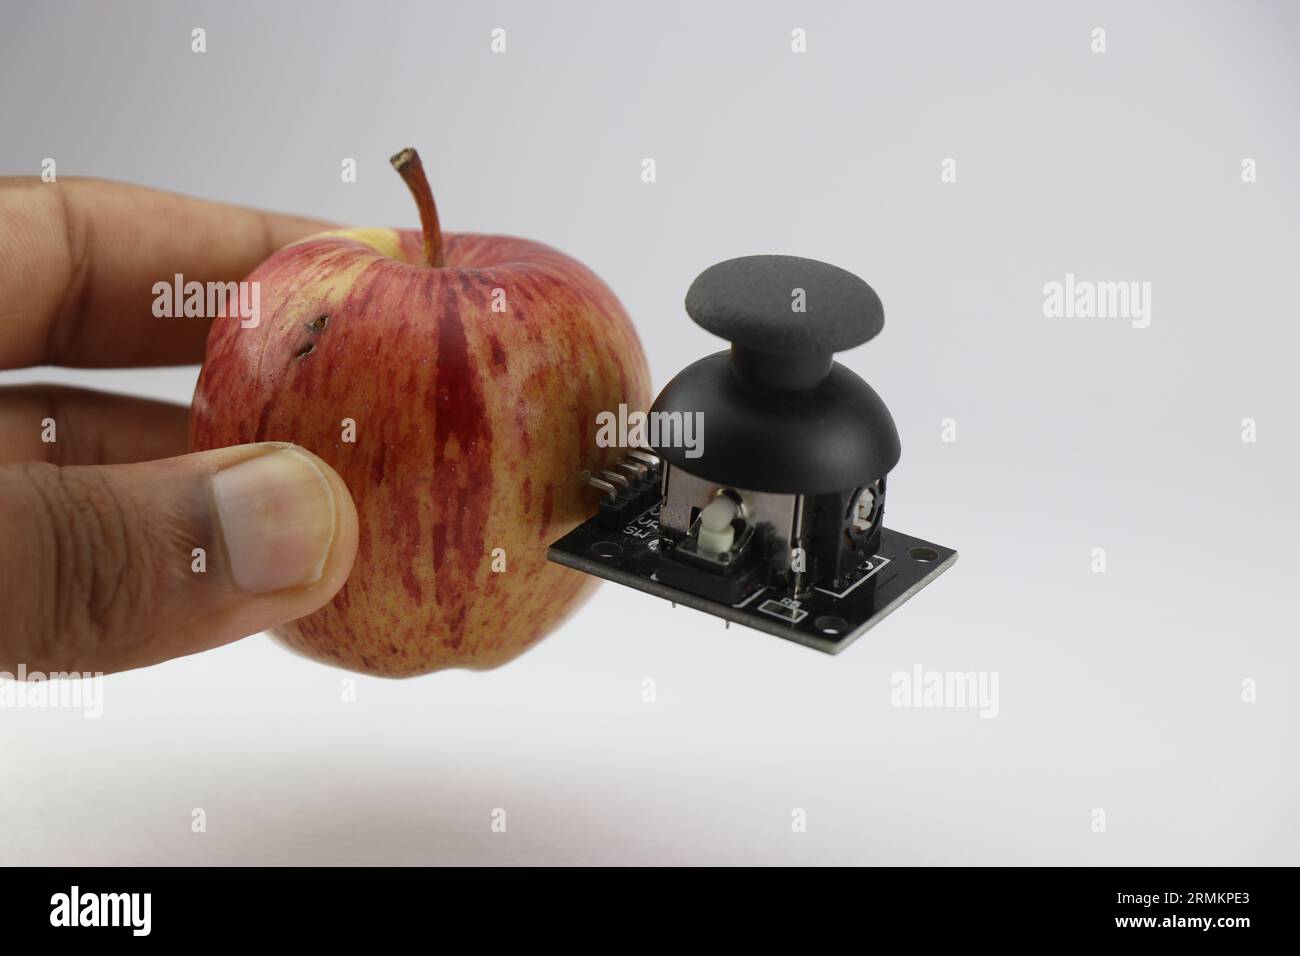 Apple with joystick module attached showing the concept of integrating technology with organic world Stock Photo